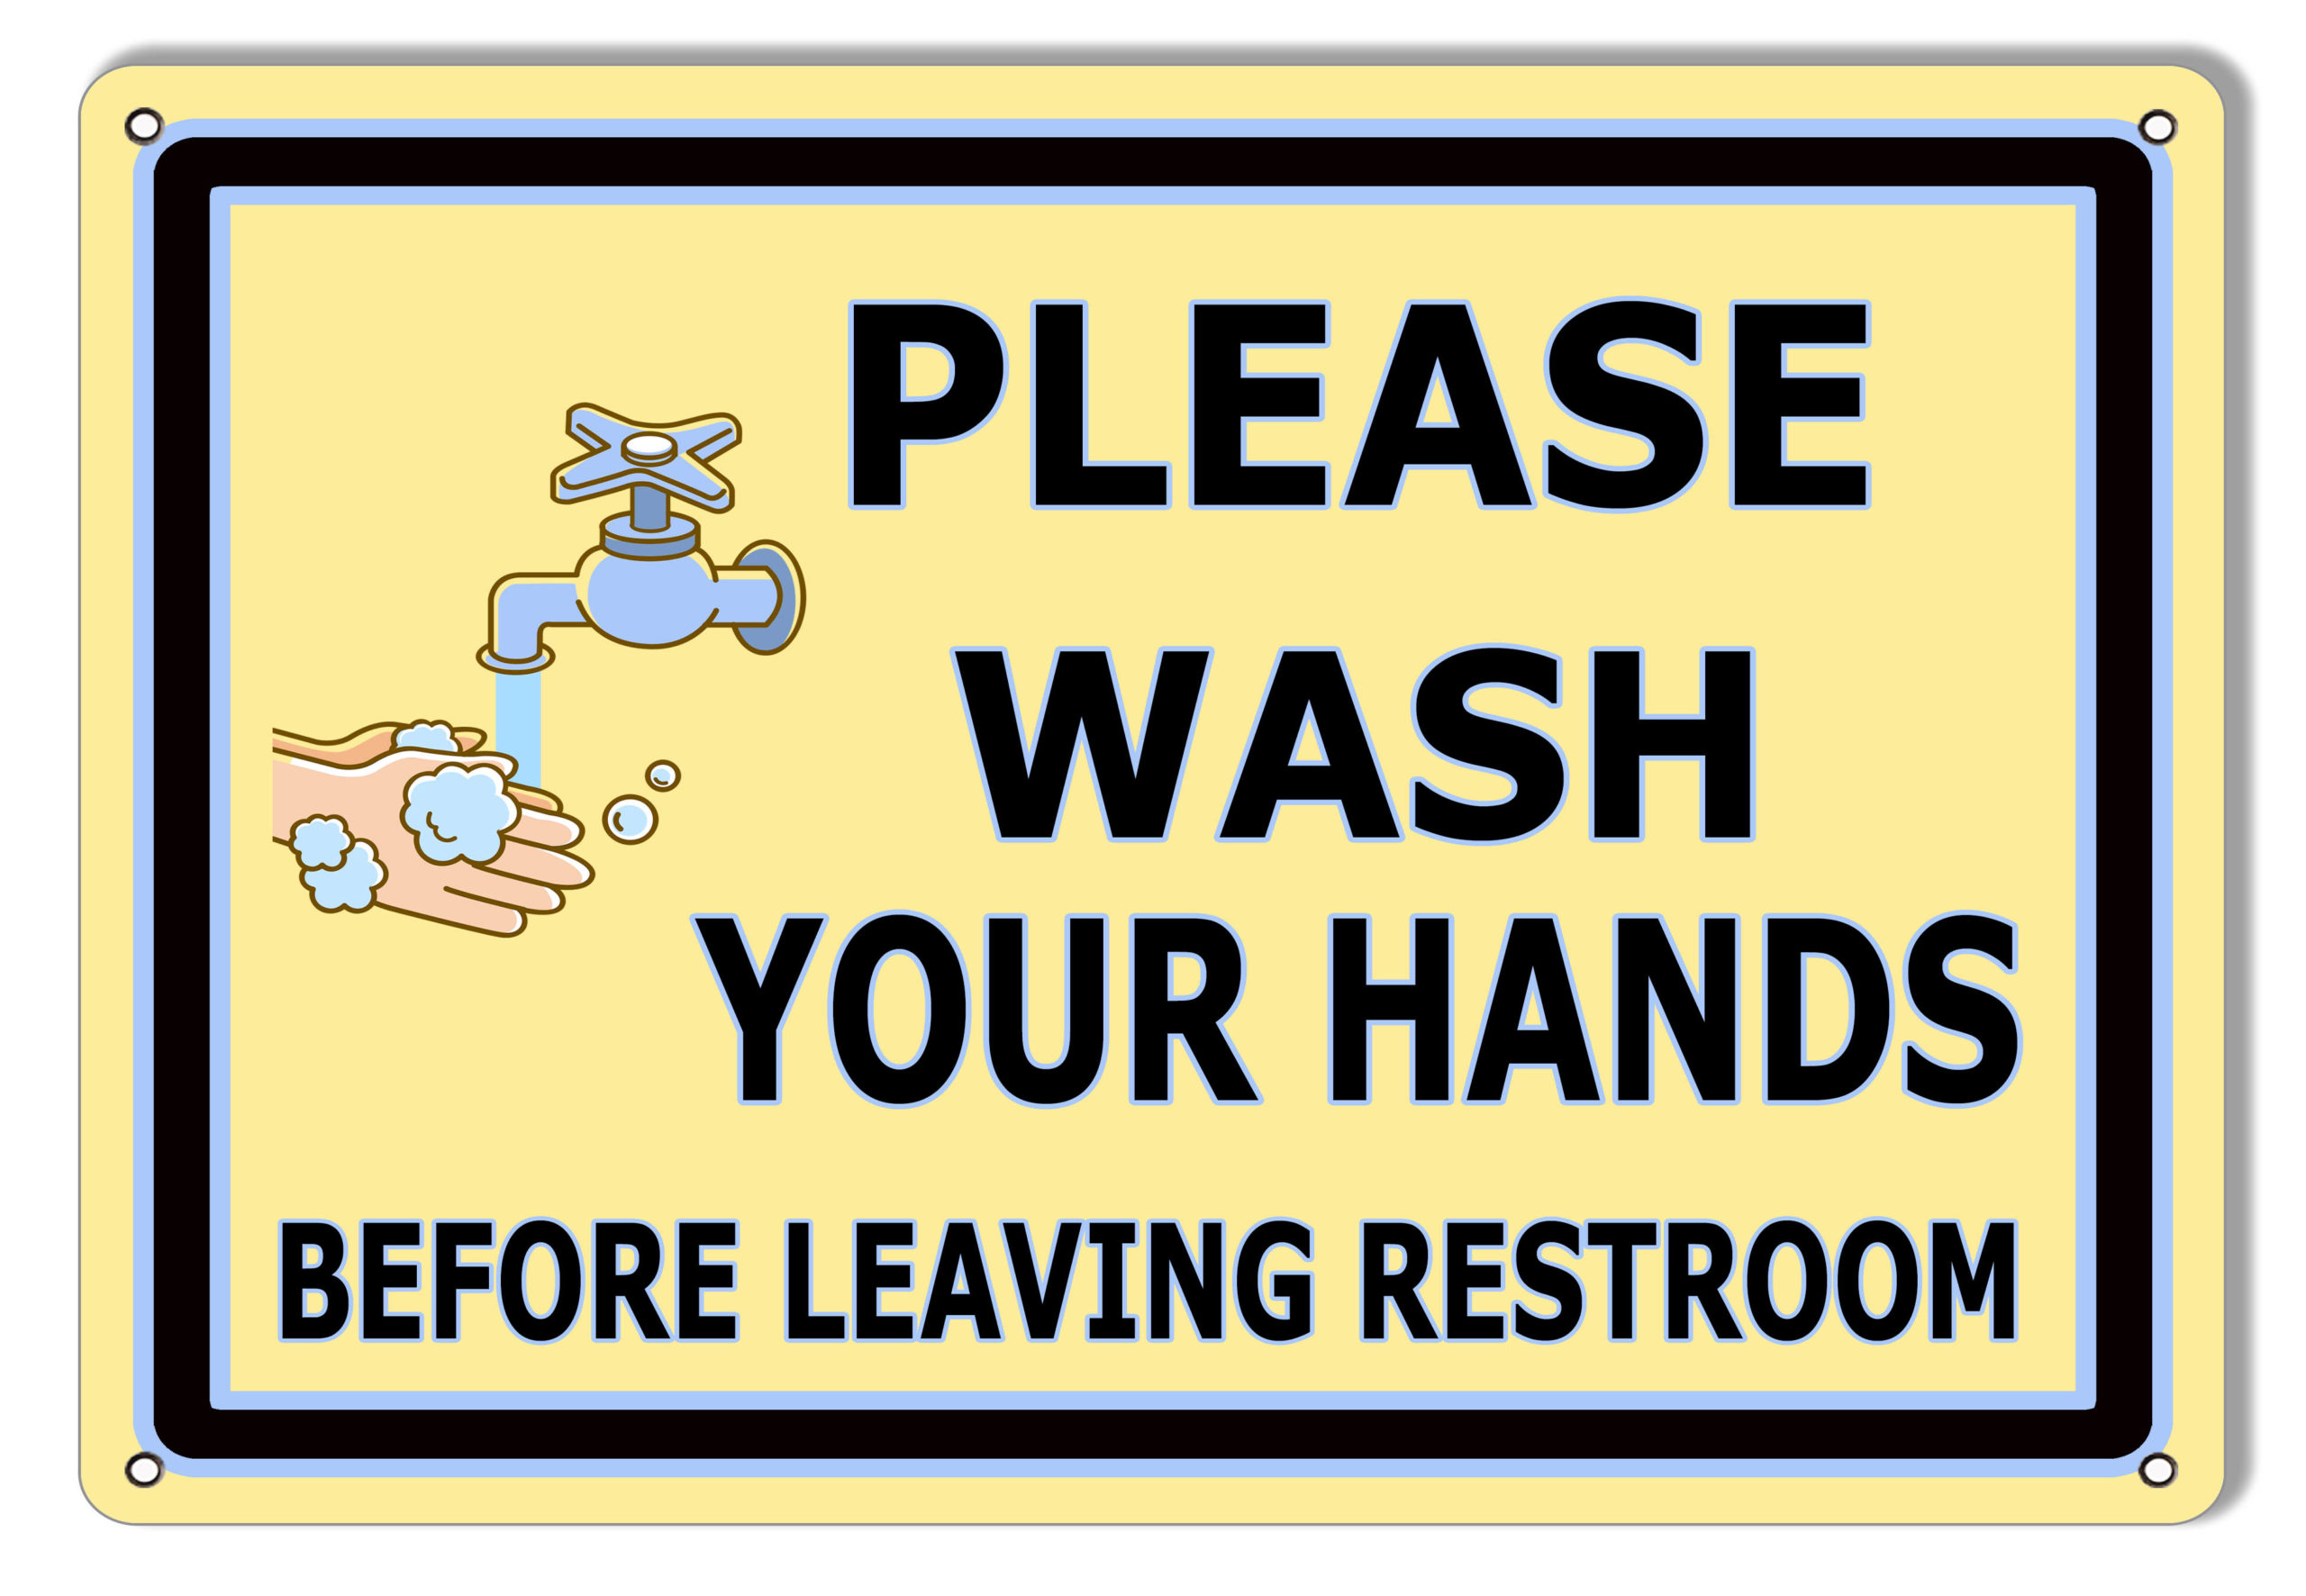 please-wash-your-hands-restroom-metal-sign-9x12-reproduction-vintage-signs